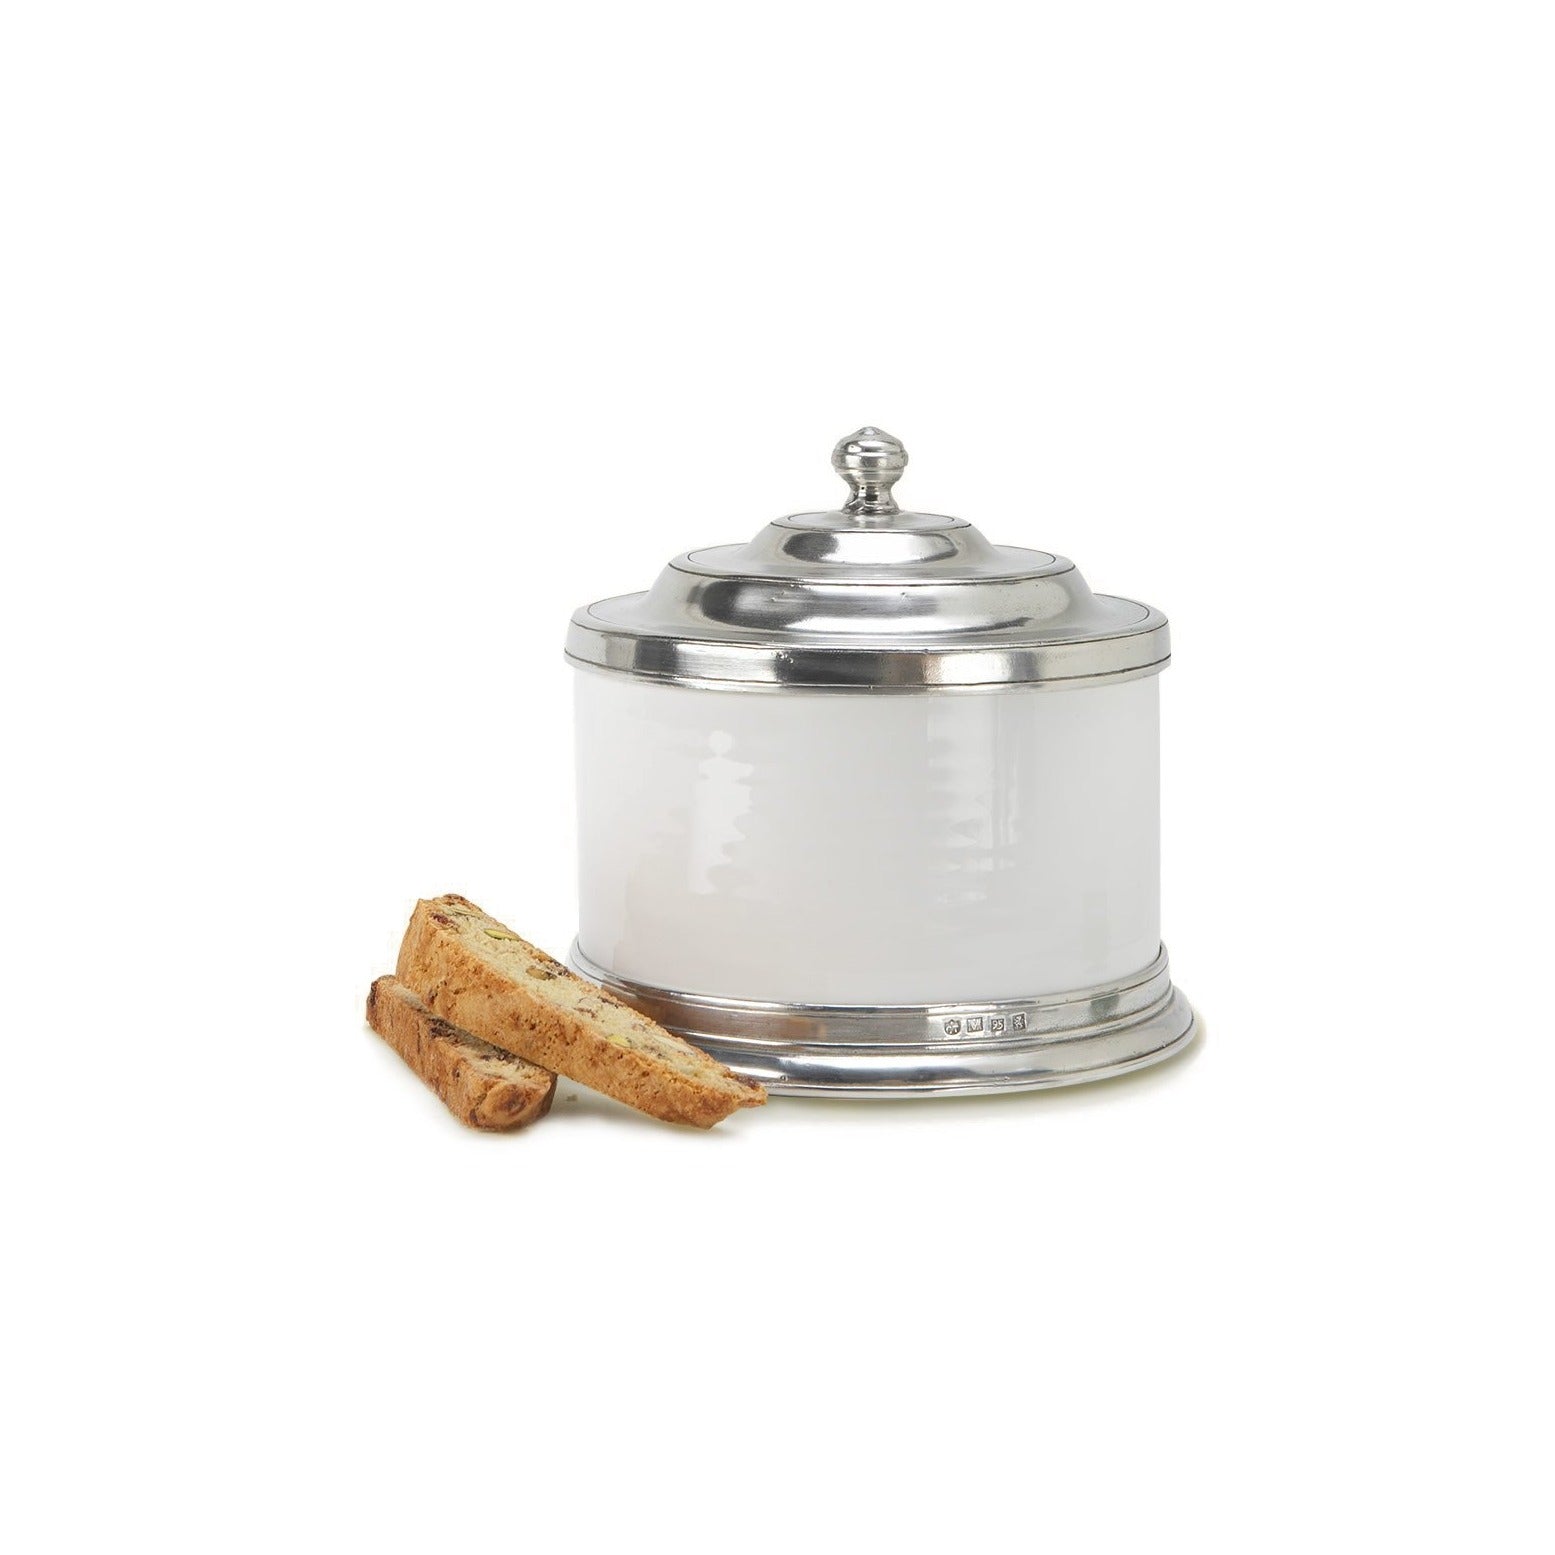 Convivio Ceramic and Pewter Lid Cookie Jar - Timothy De Clue Collection